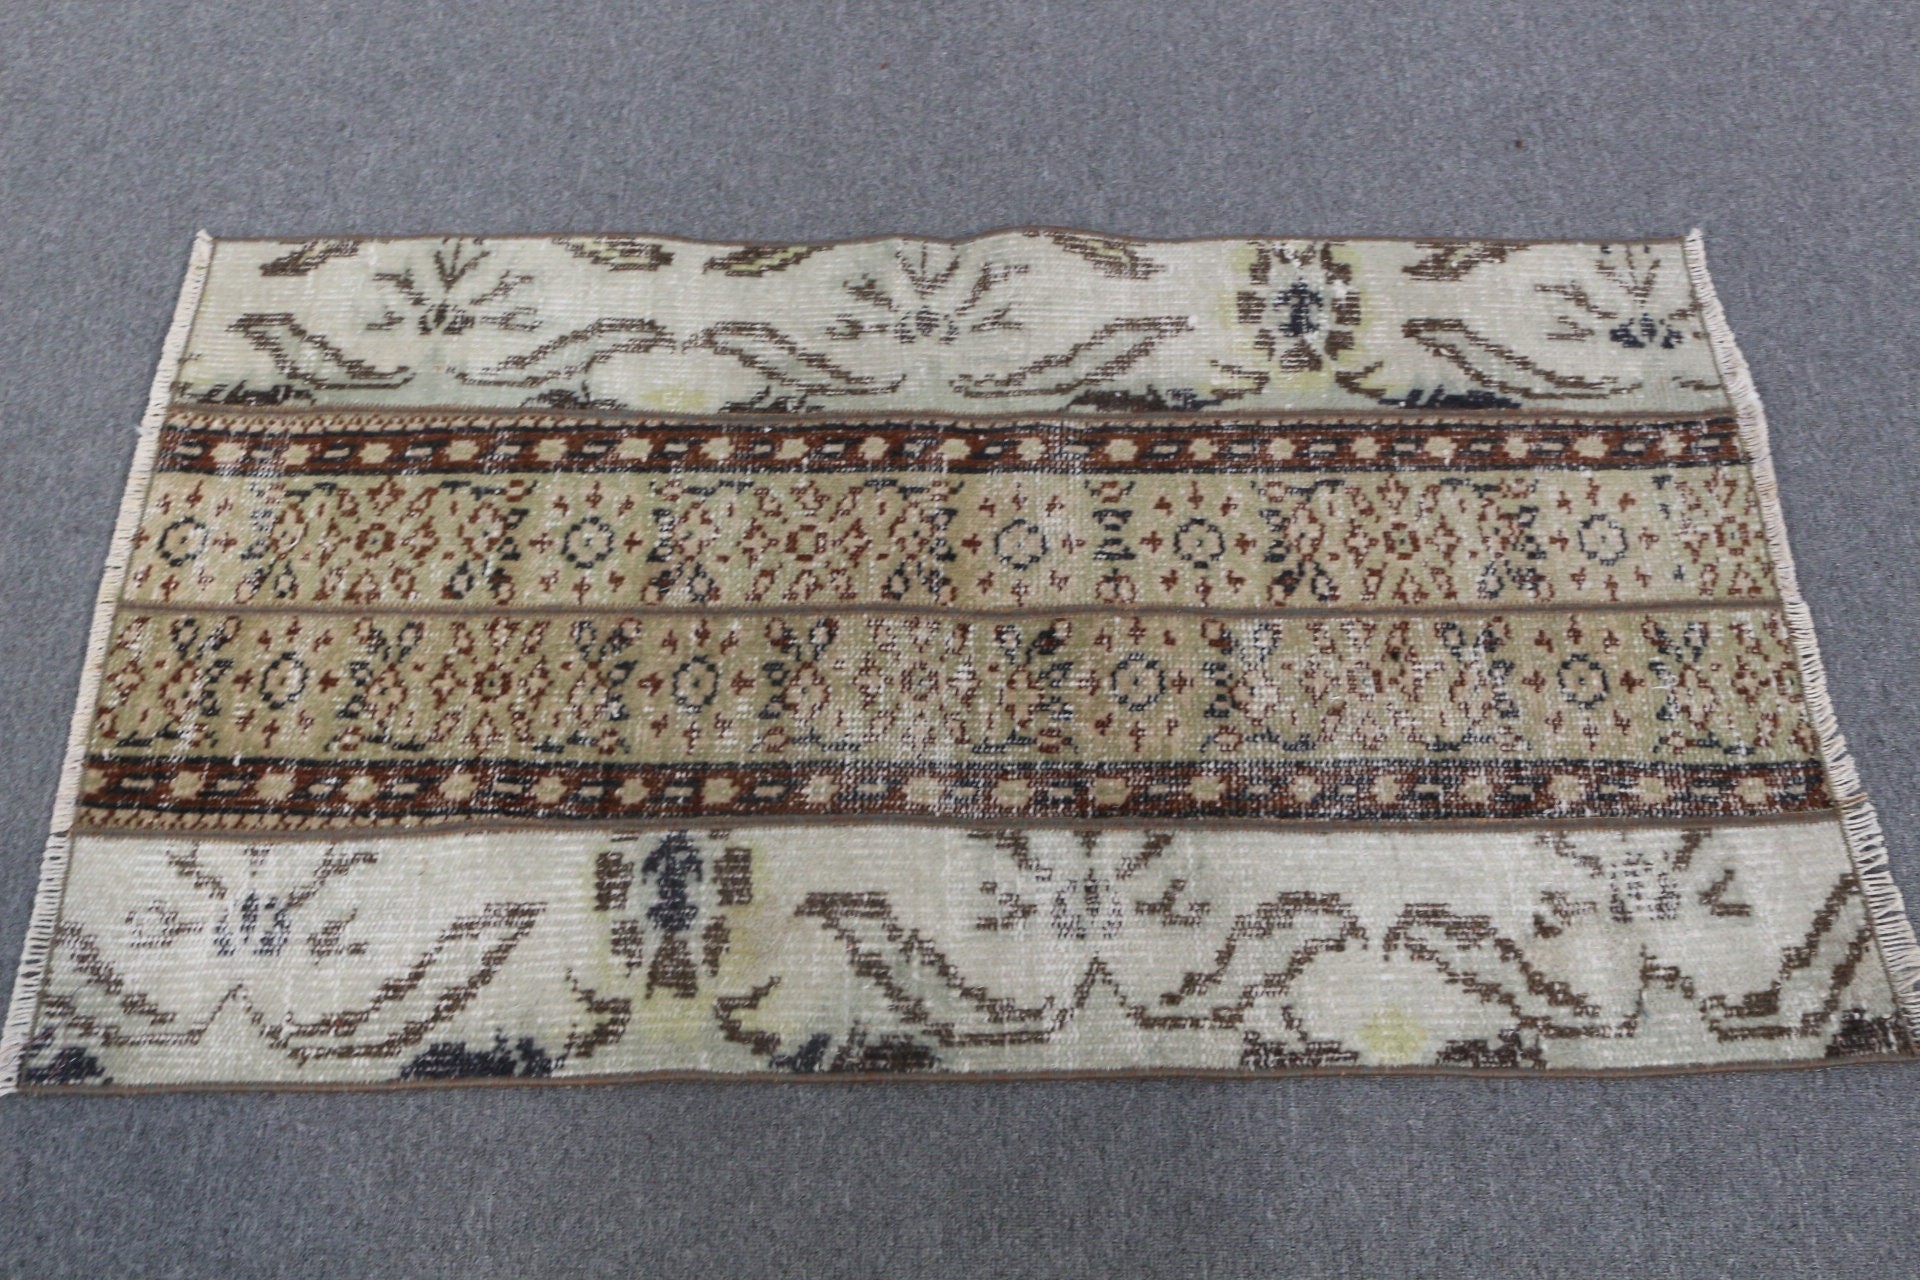 Beige Cool Rug, Bedroom Rug, Turkish Rugs, Bath Rug, 2.3x4 ft Small Rug, Rugs for Kitchen, Gift For The Home Rug, Vintage Rugs, Cool Rug